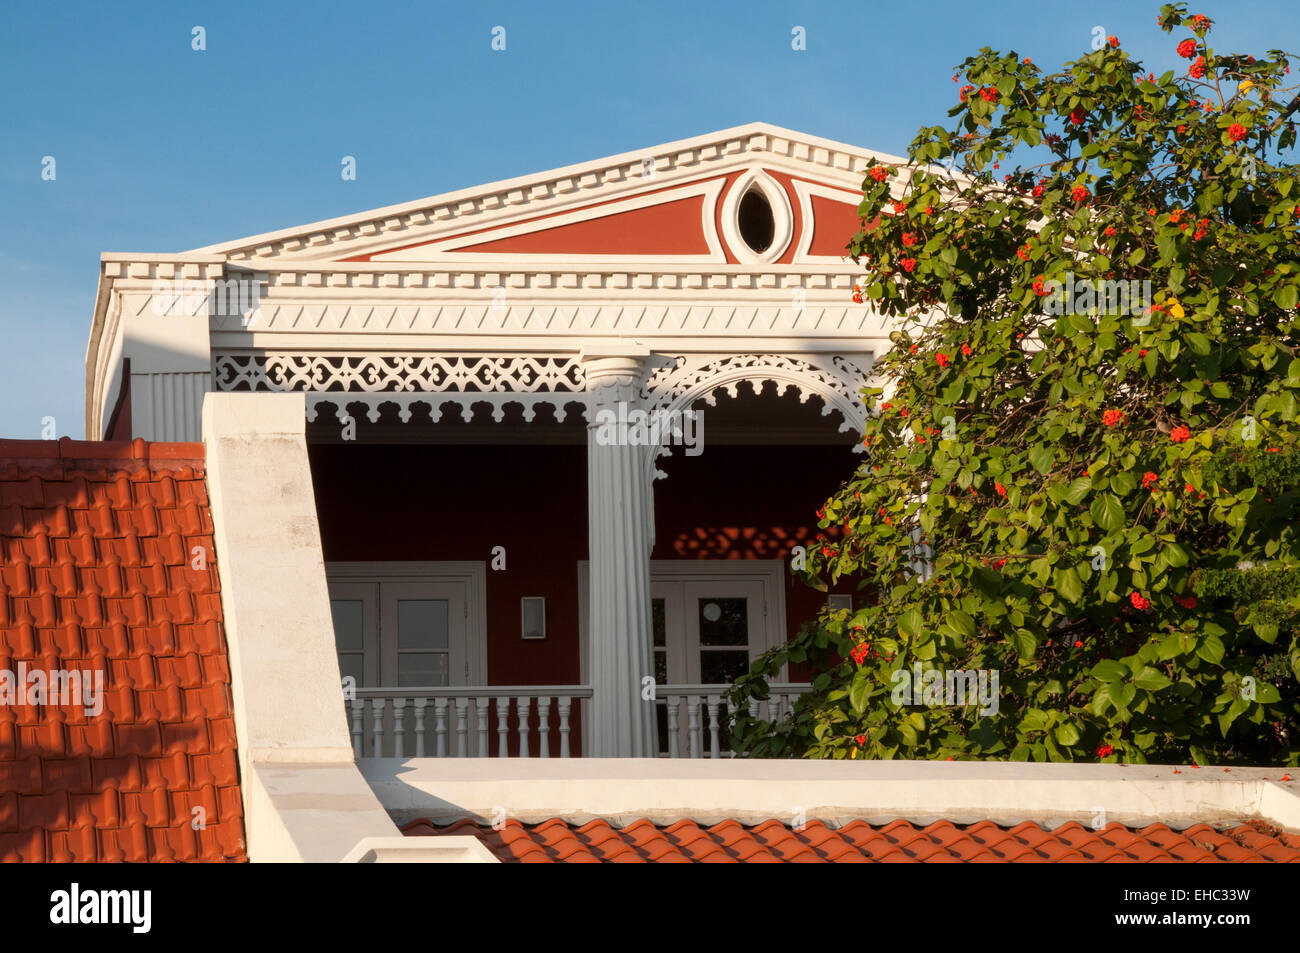 Capital of the tropical and dry Caribbean Island Aruba is Oranjestad with less than 30.000 people living there. Stock Photo